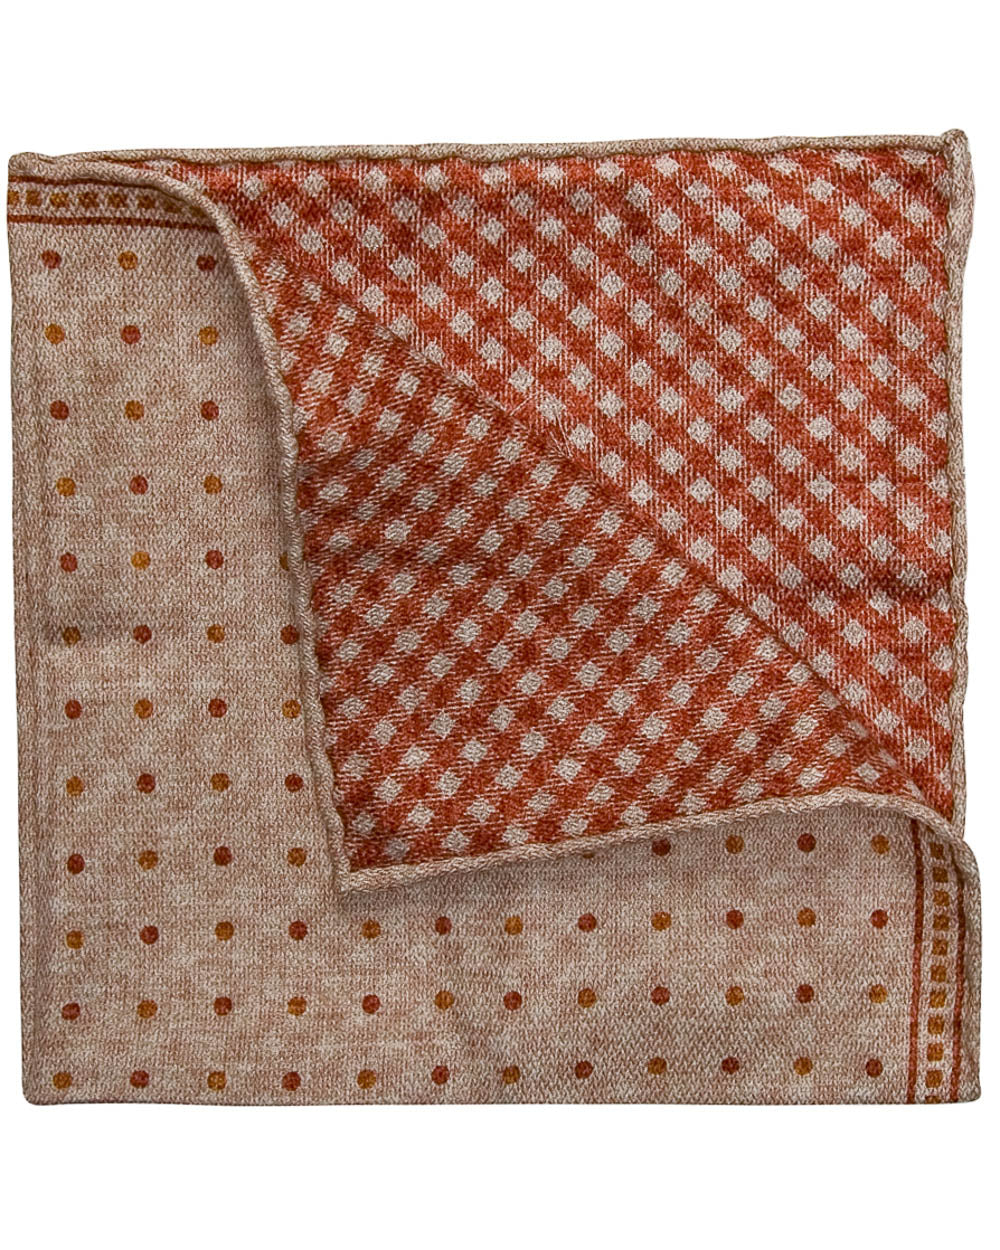 Beige with Brick and Gold Dotted Pocket Square